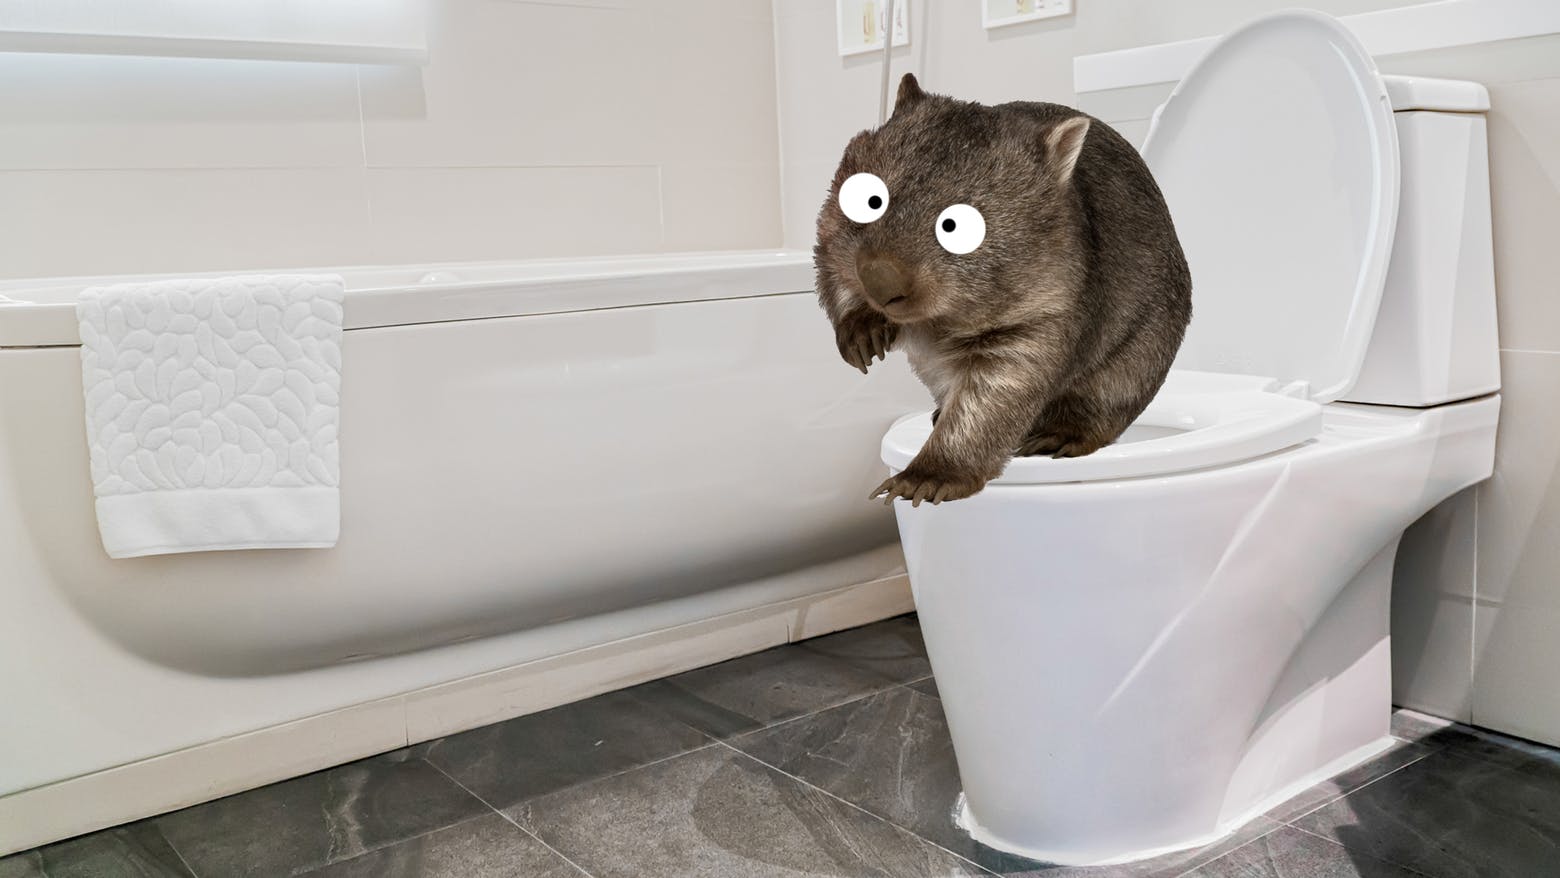 A wombat using the toilet